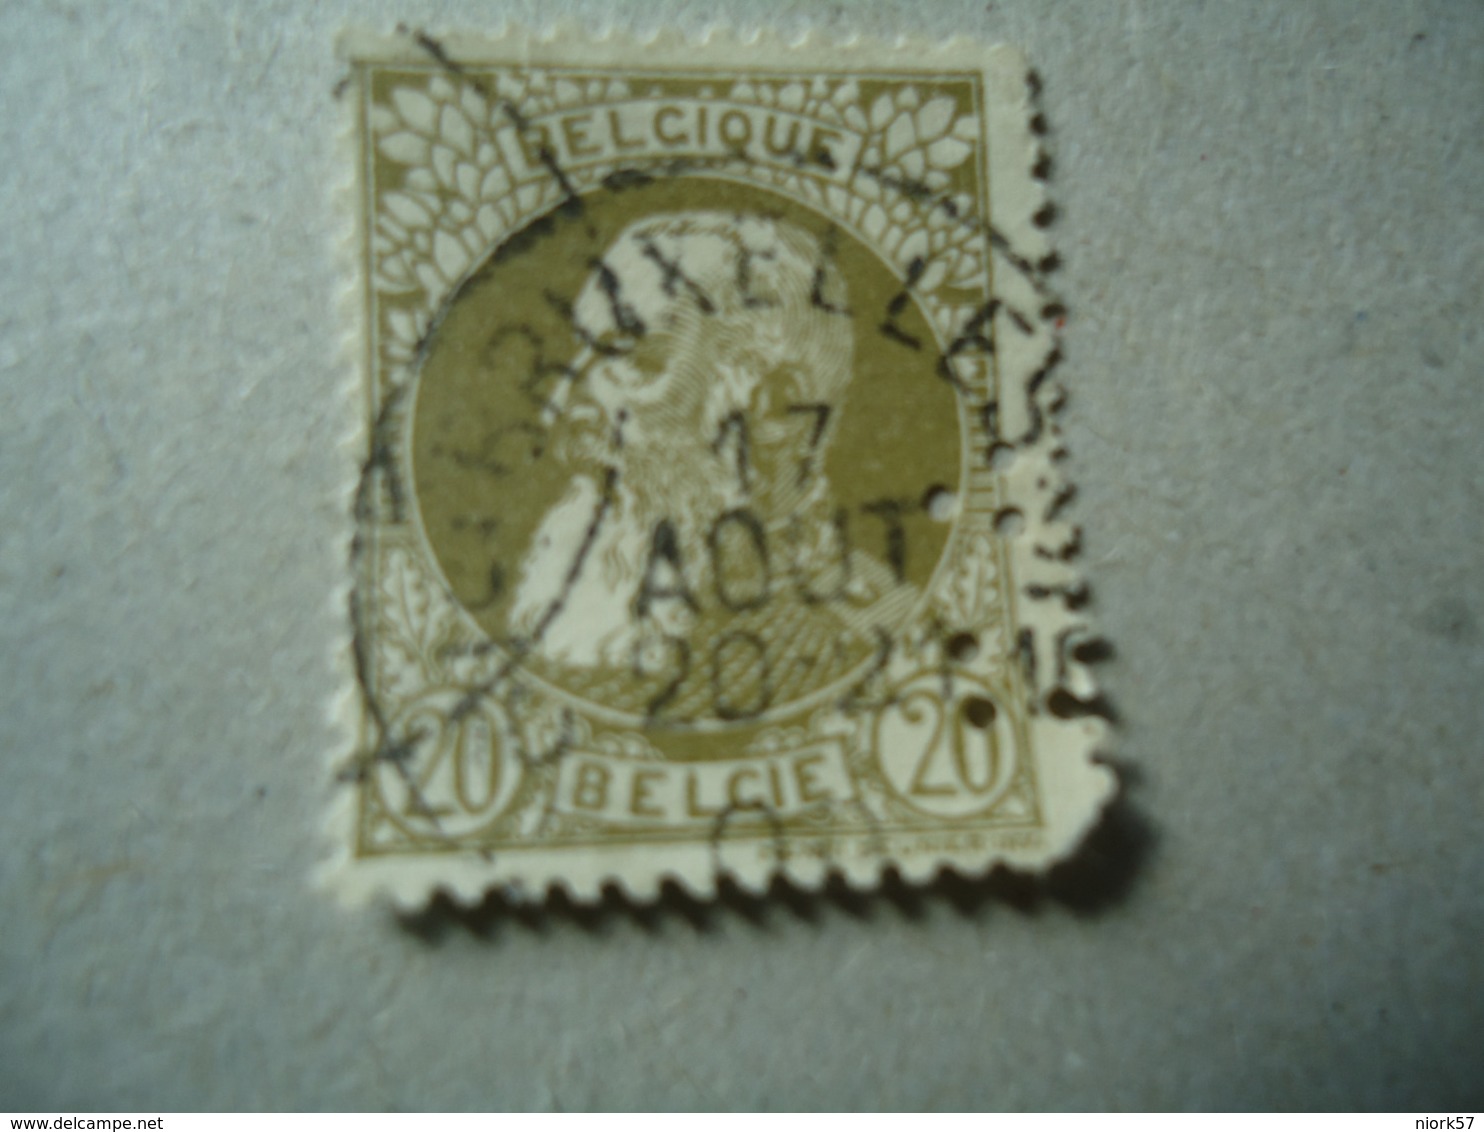 BELGIUM USED   PERFINS STAMPS - Unclassified